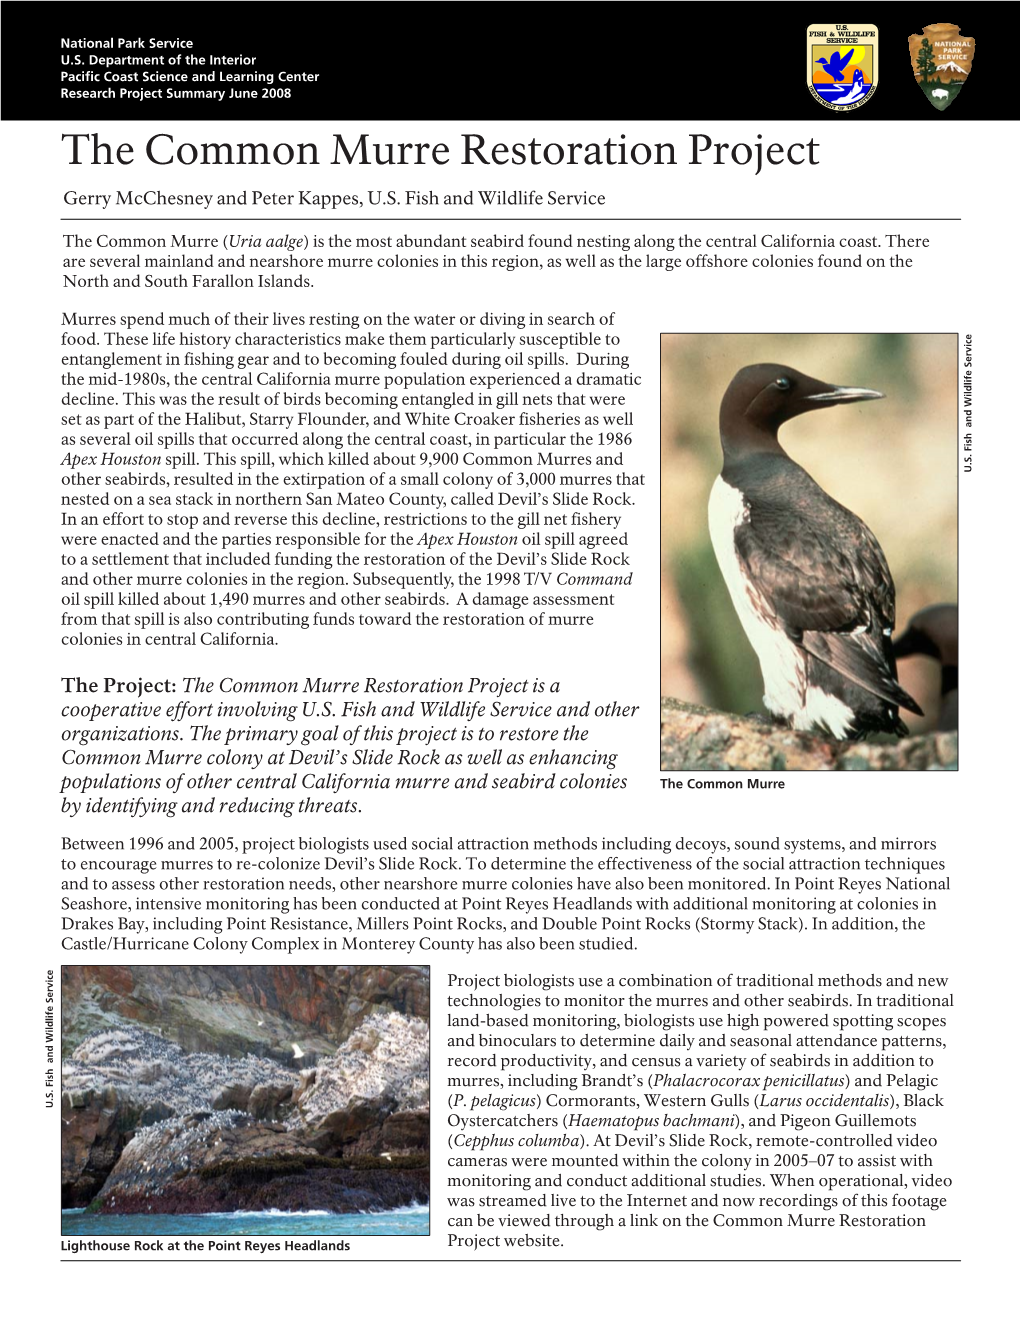 The Common Murre Restoration Project Gerry Mcchesney and Peter Kappes, U.S